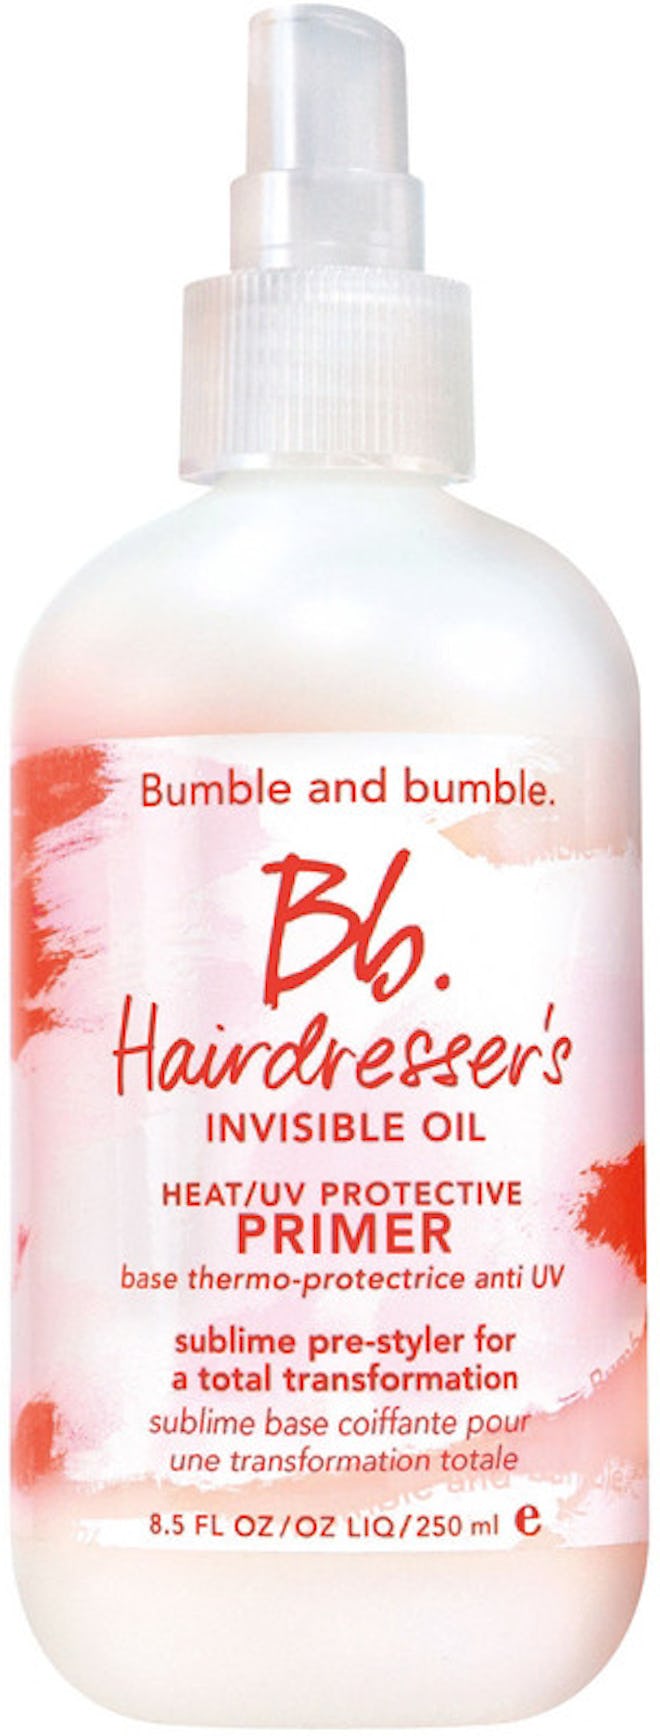 Bumble & bumble Bb.Hairdresser's Invisible Oil Heat/UV Protective Primer